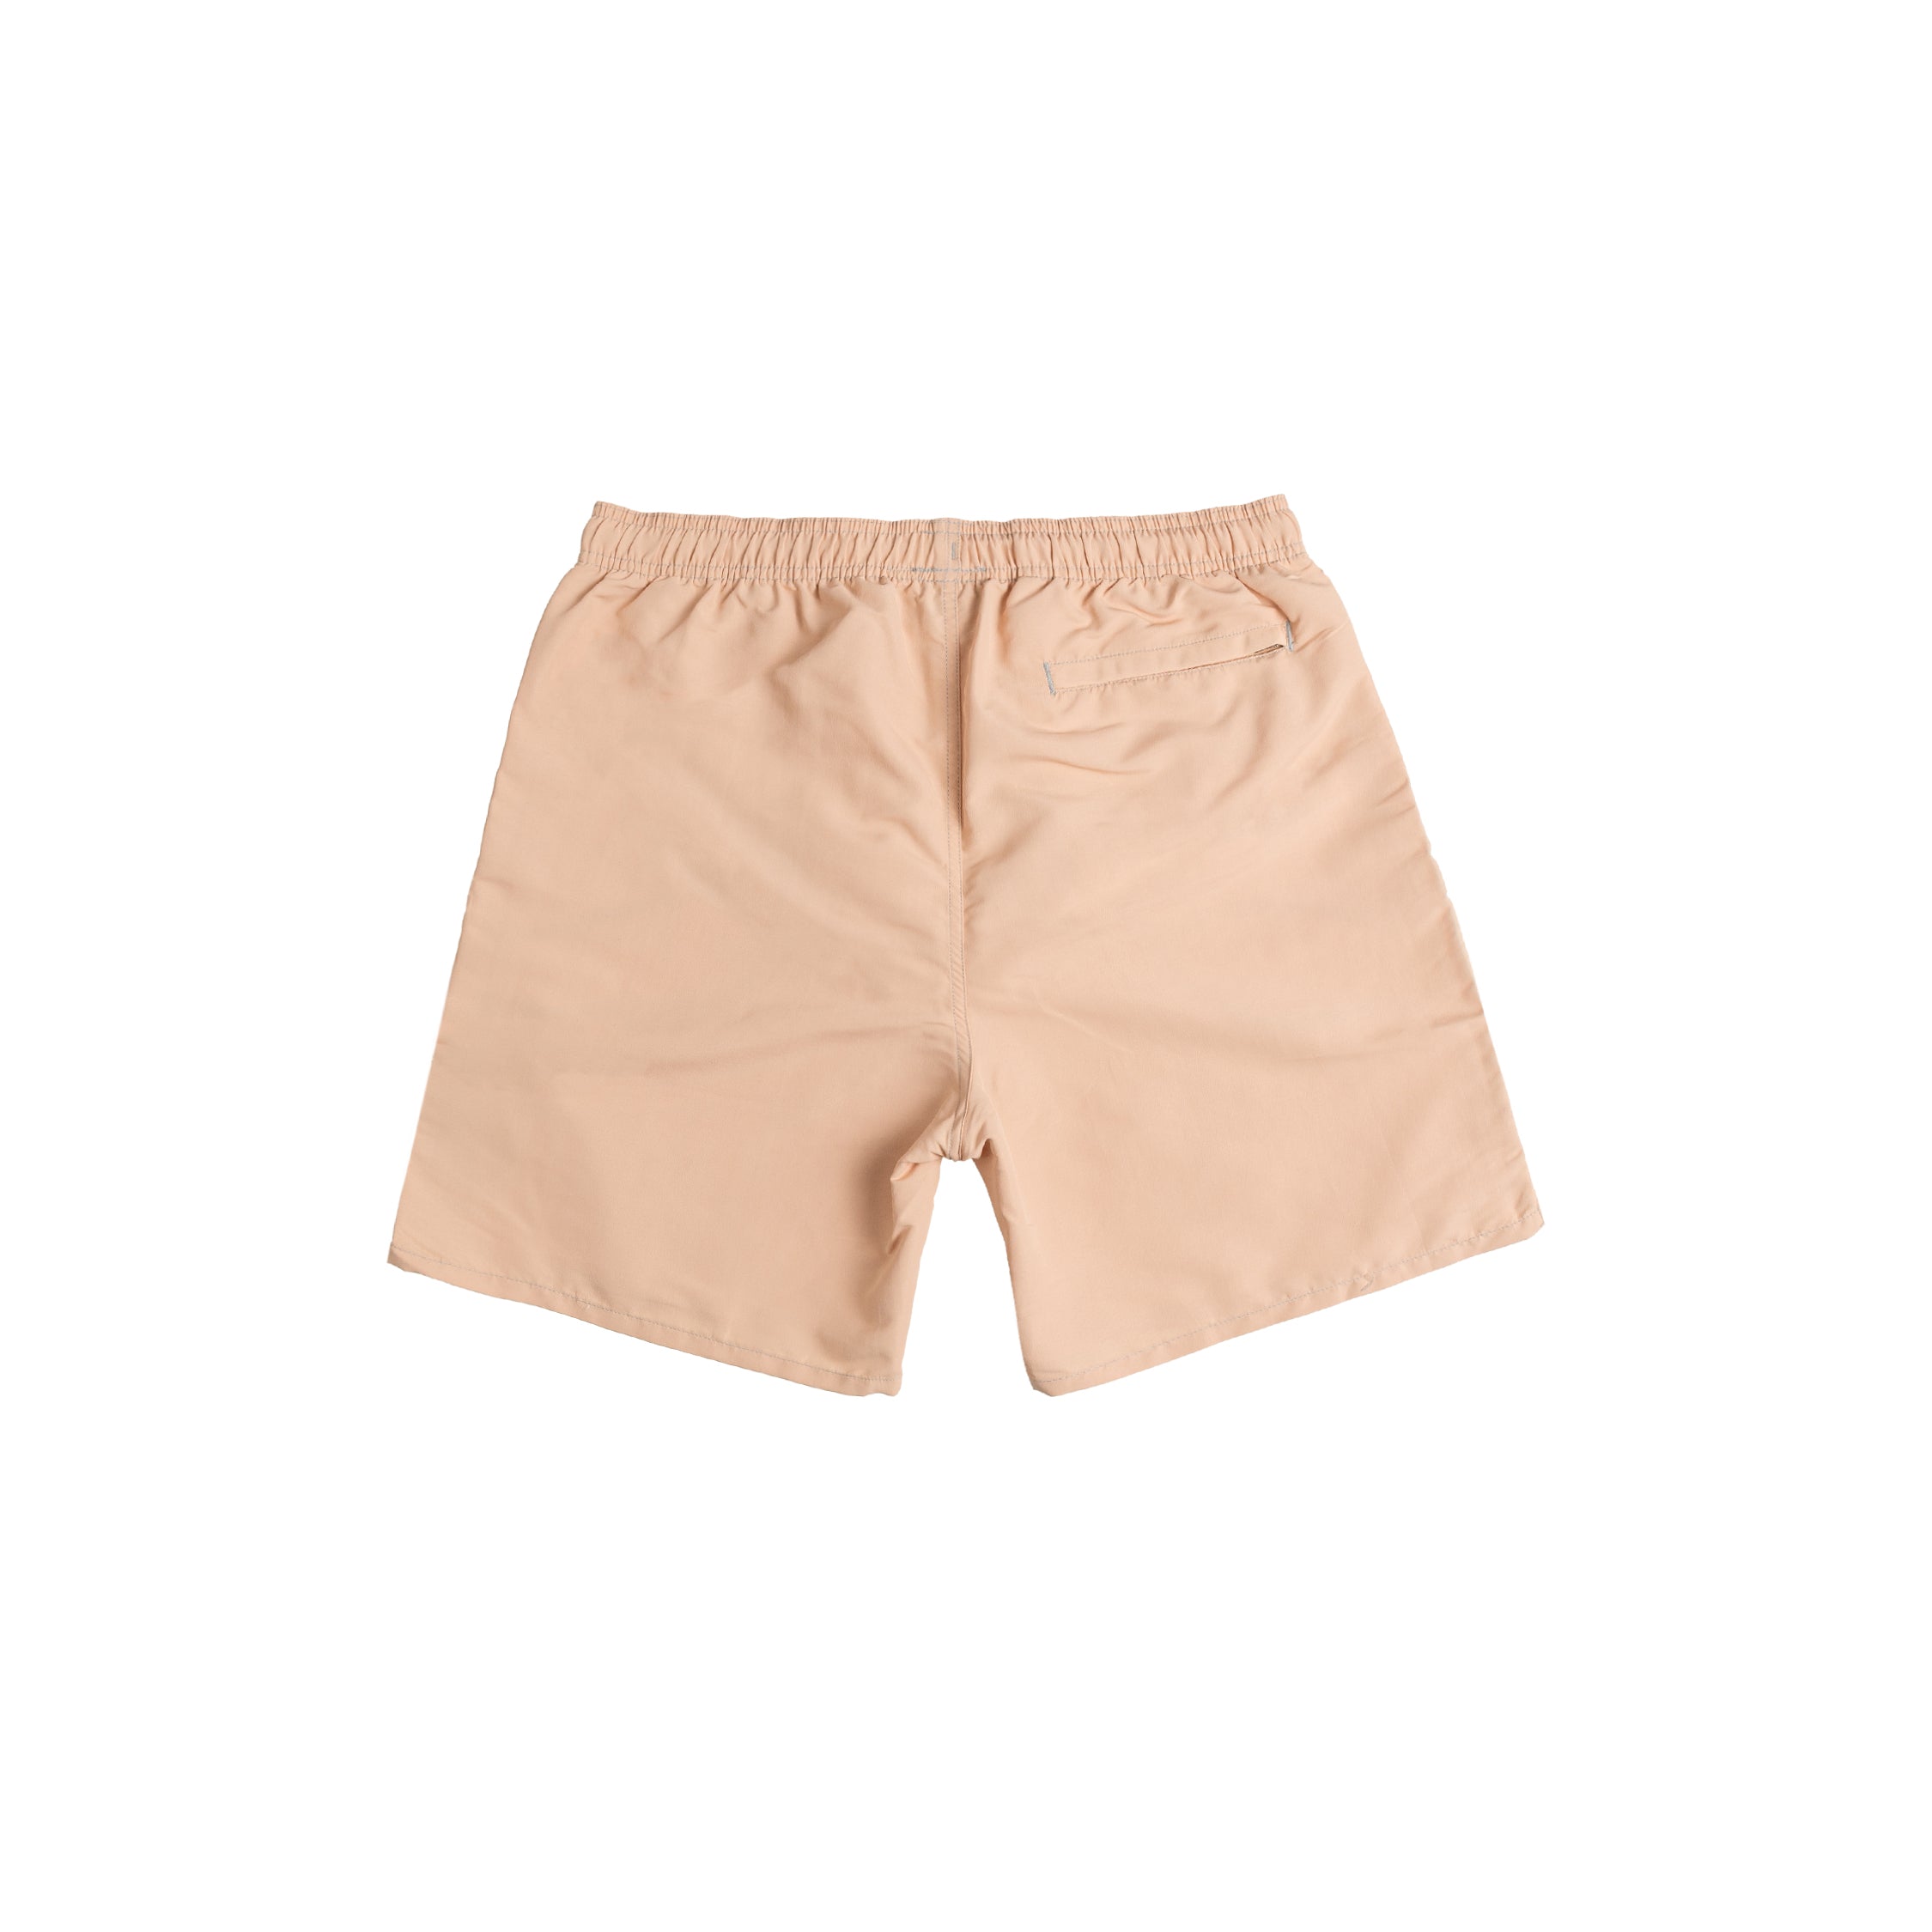 Stussy Surfman Water Shorts » Buy online now!